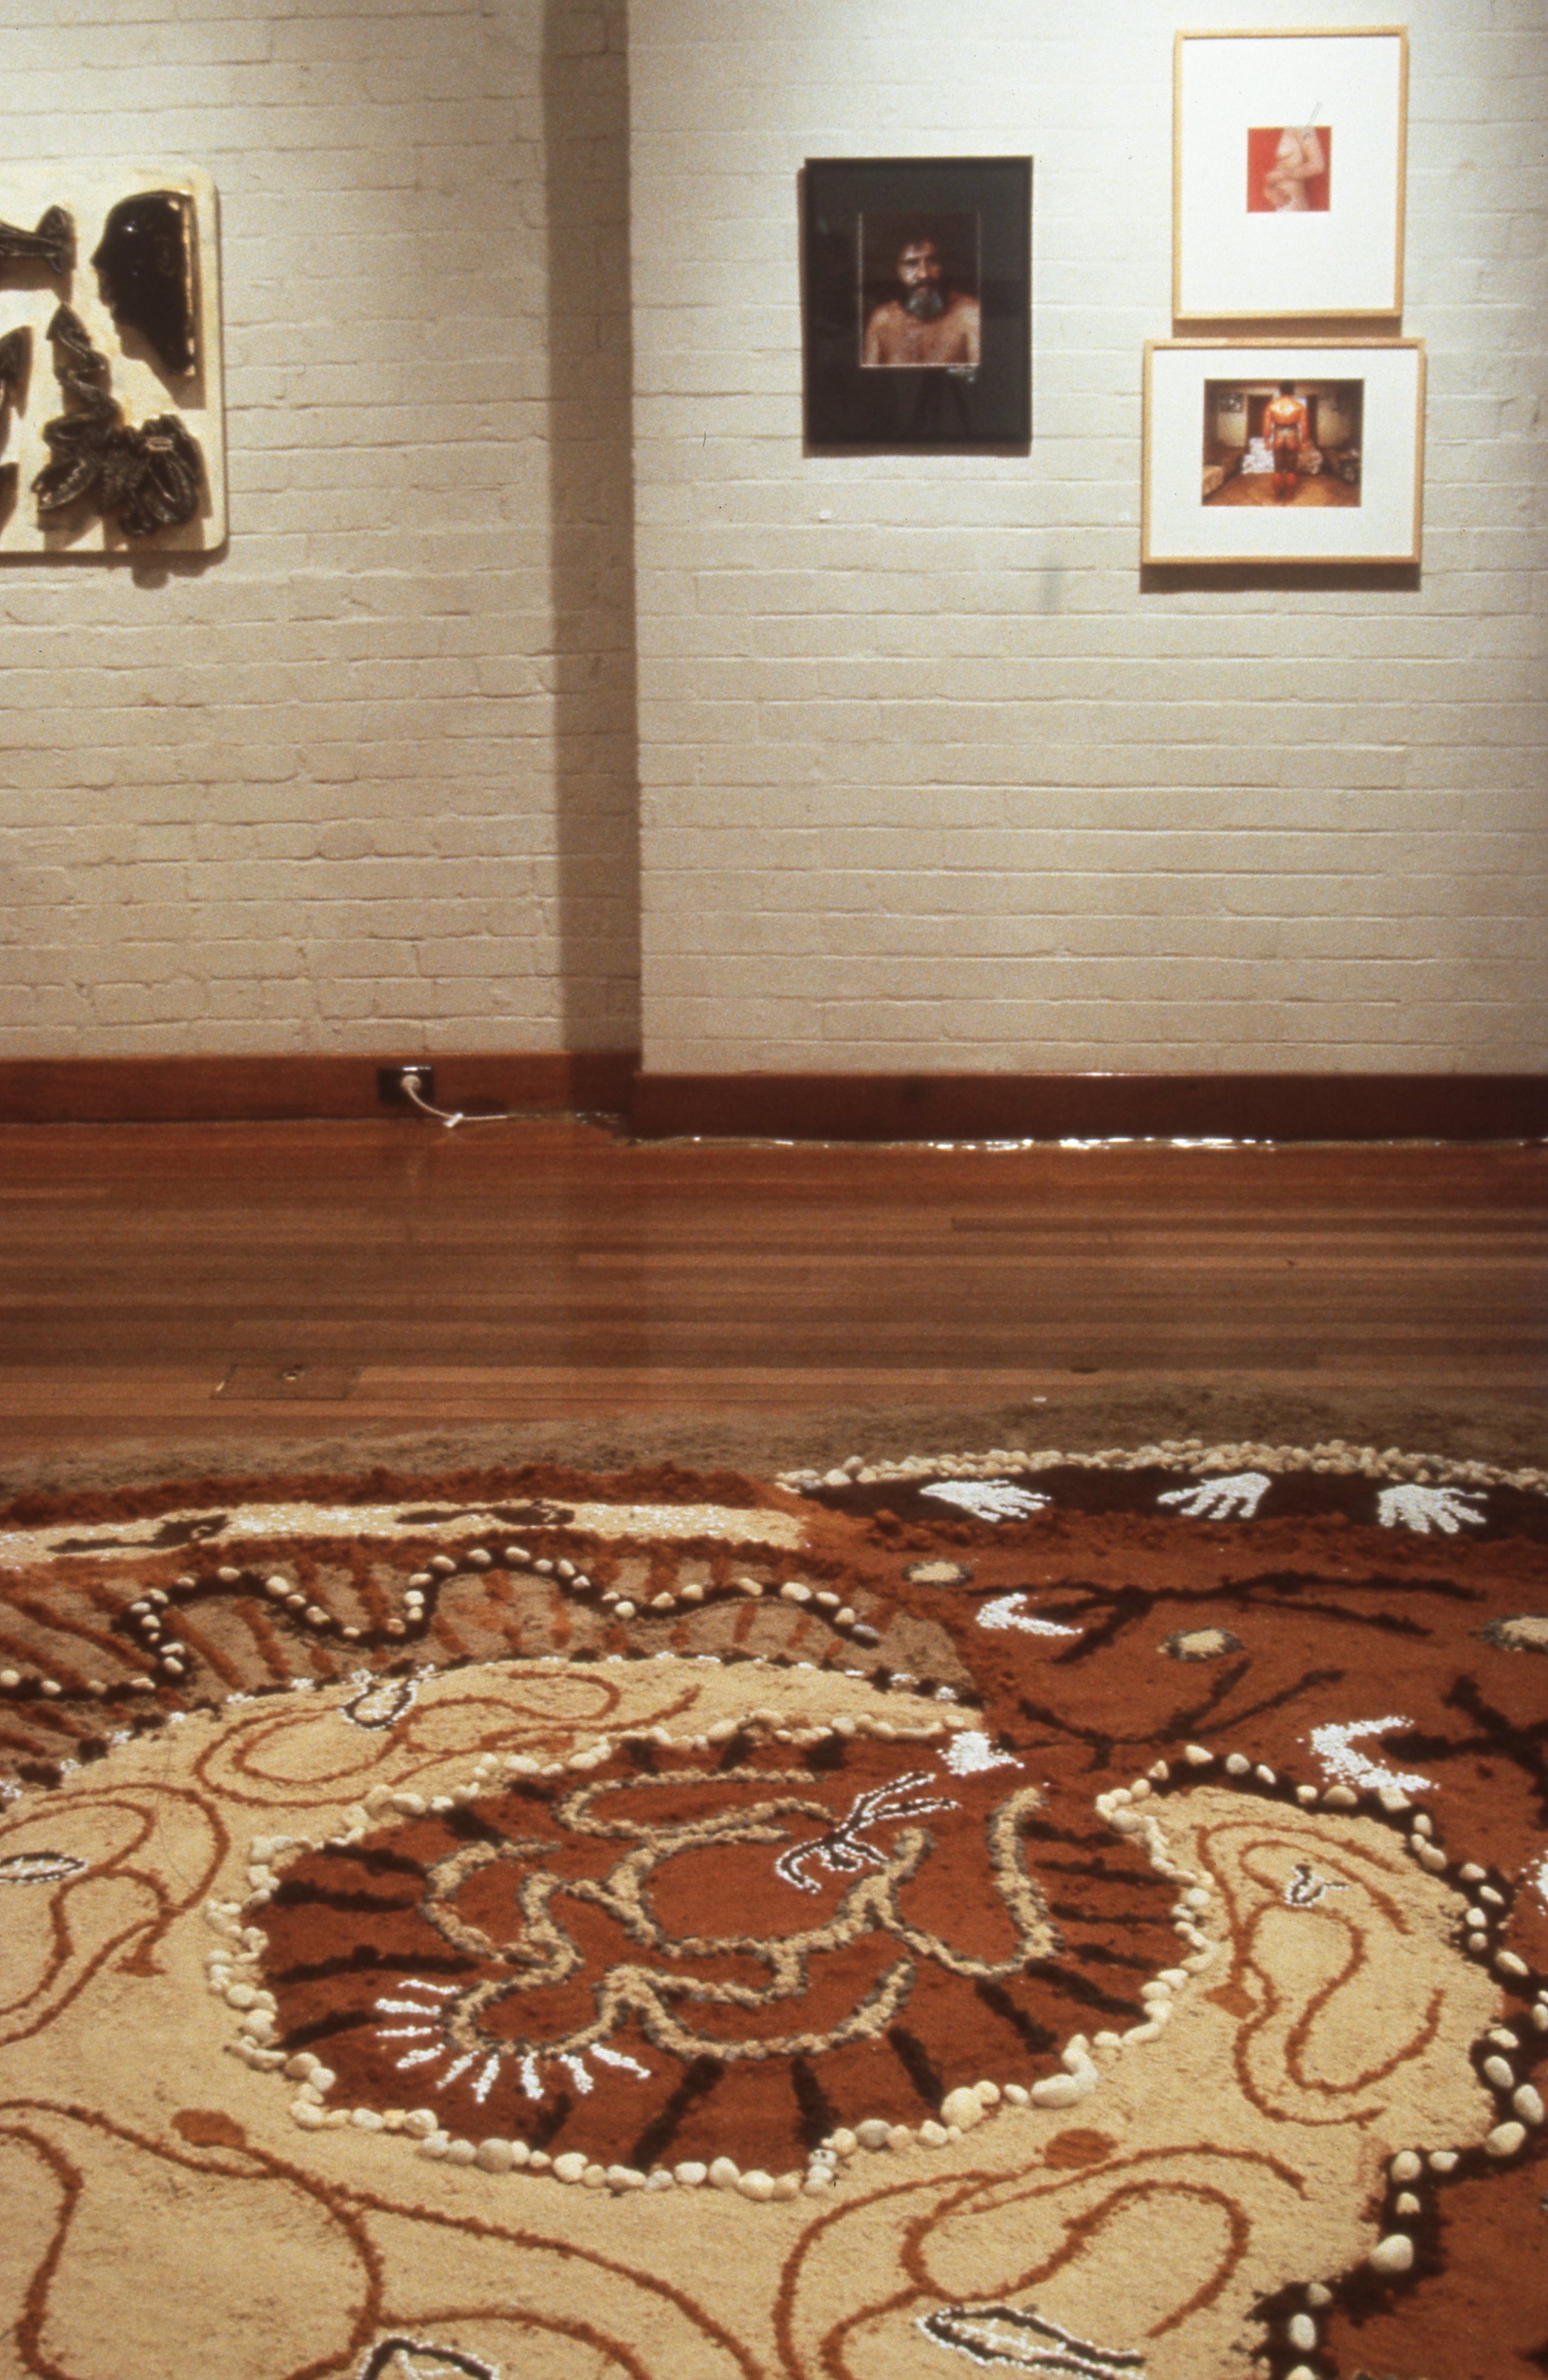 idg_archive_1989_delineations_exploring_drawing_002_install.jpg